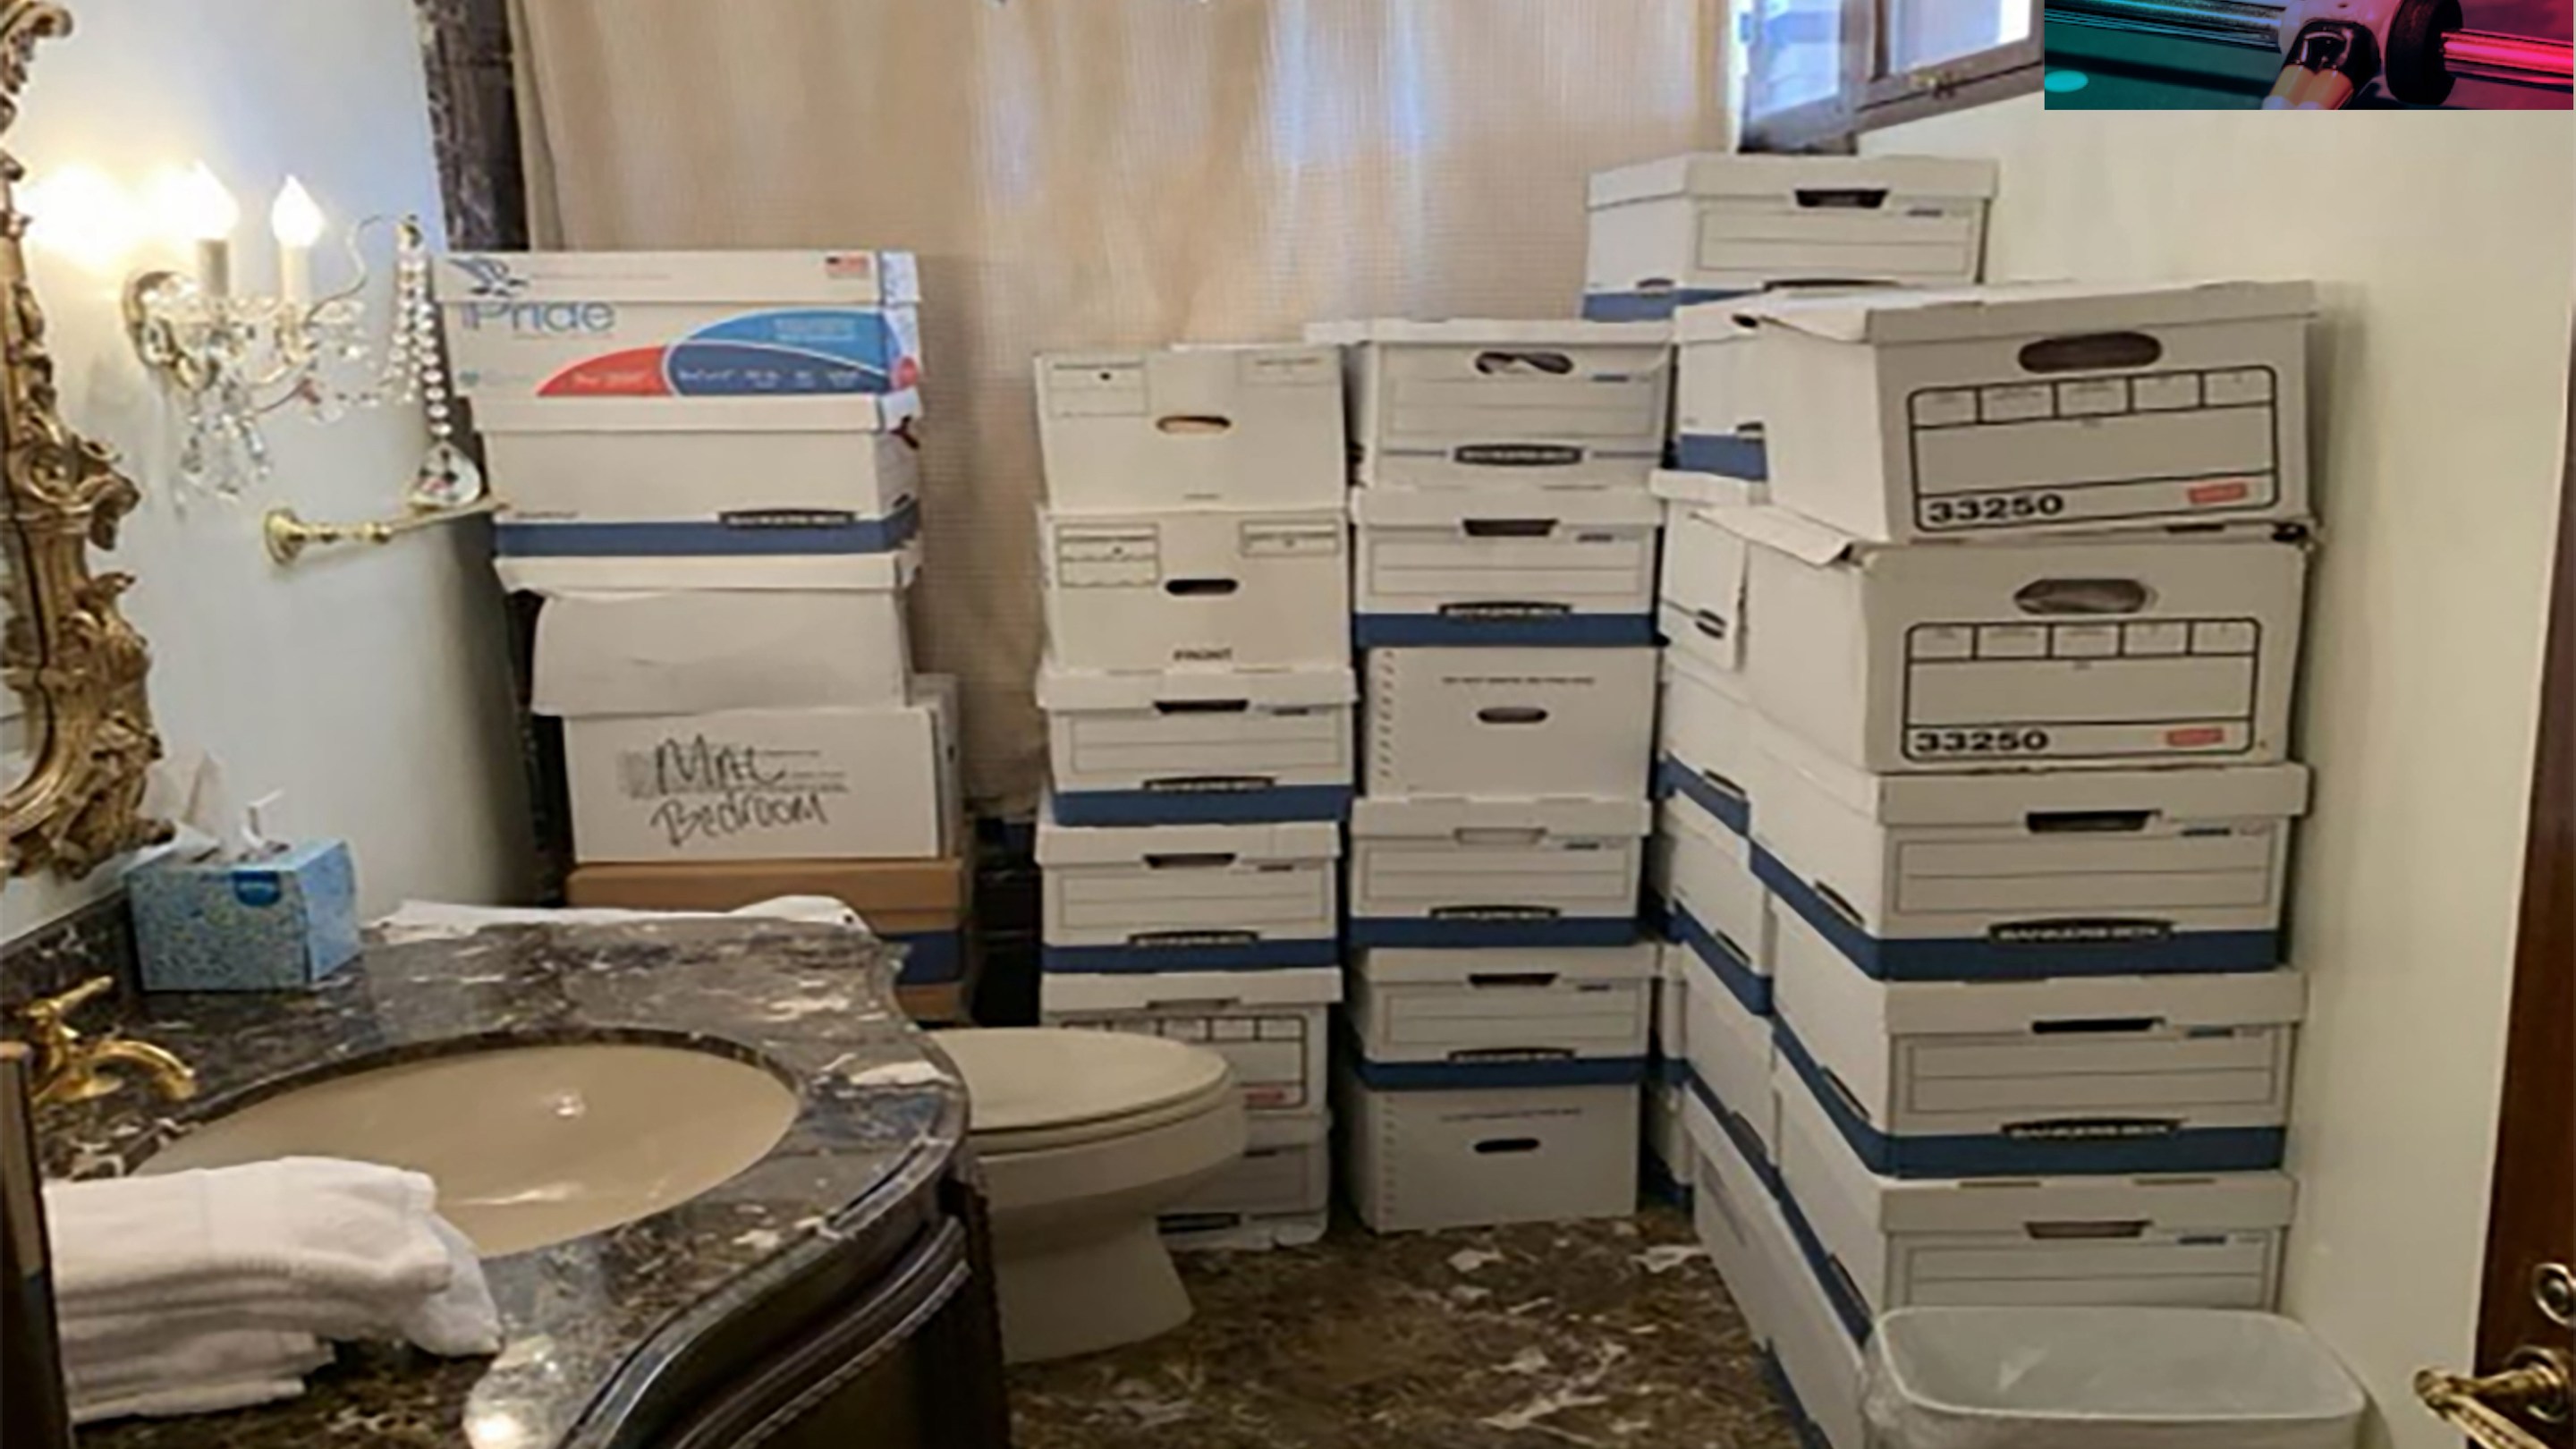 A bathroom at Mar-a-Lago positively jammed with boxes full of junk.